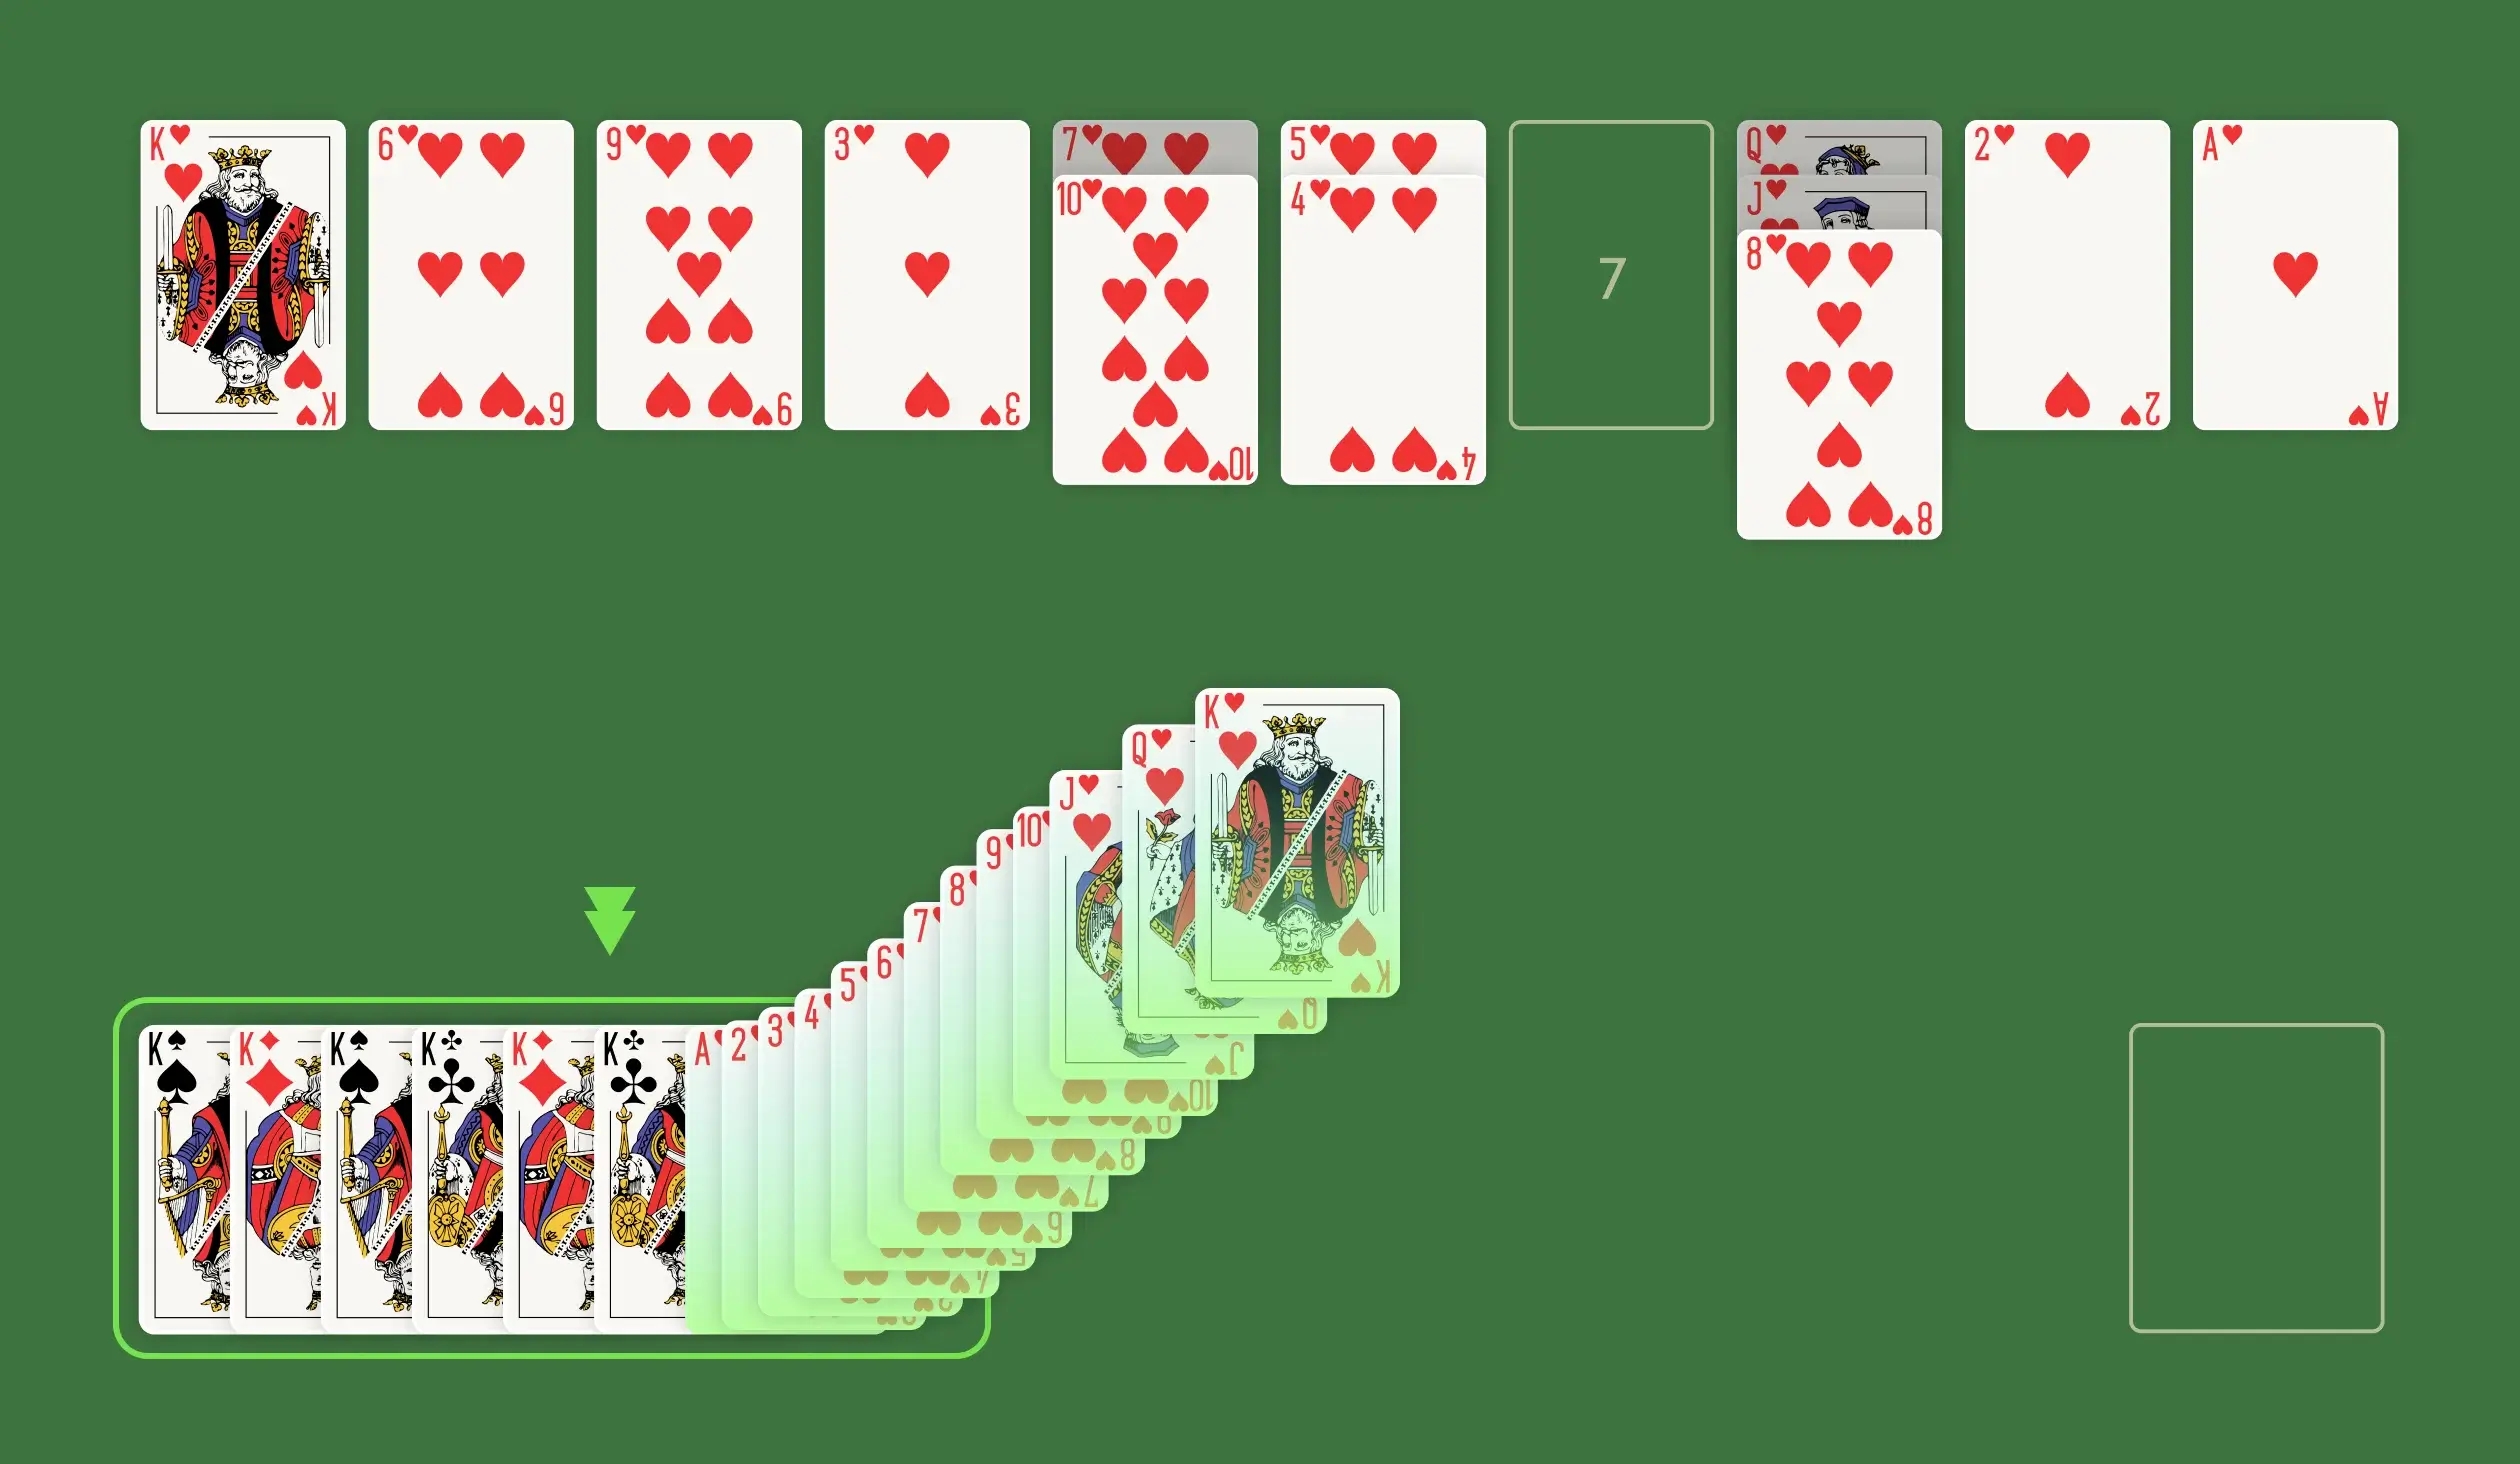 Winning 4 Suits Spider Solitaire is only as easy as the confidence you feel while playing the game. Once you completely form the 4 different suits within the Tableau, you will win the game.